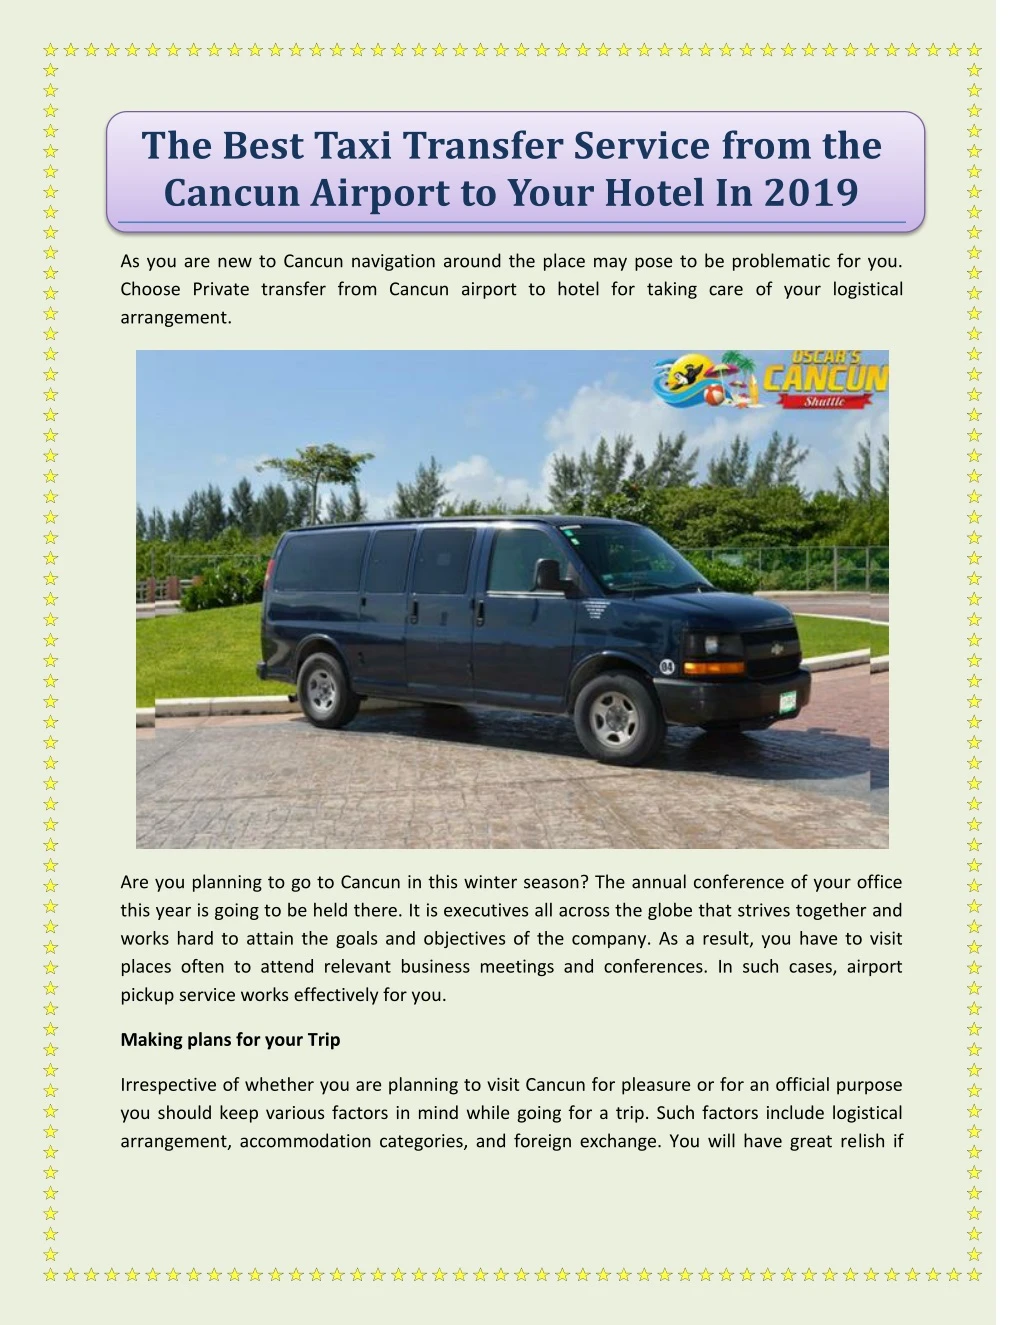 the best taxi transfer service from the cancun